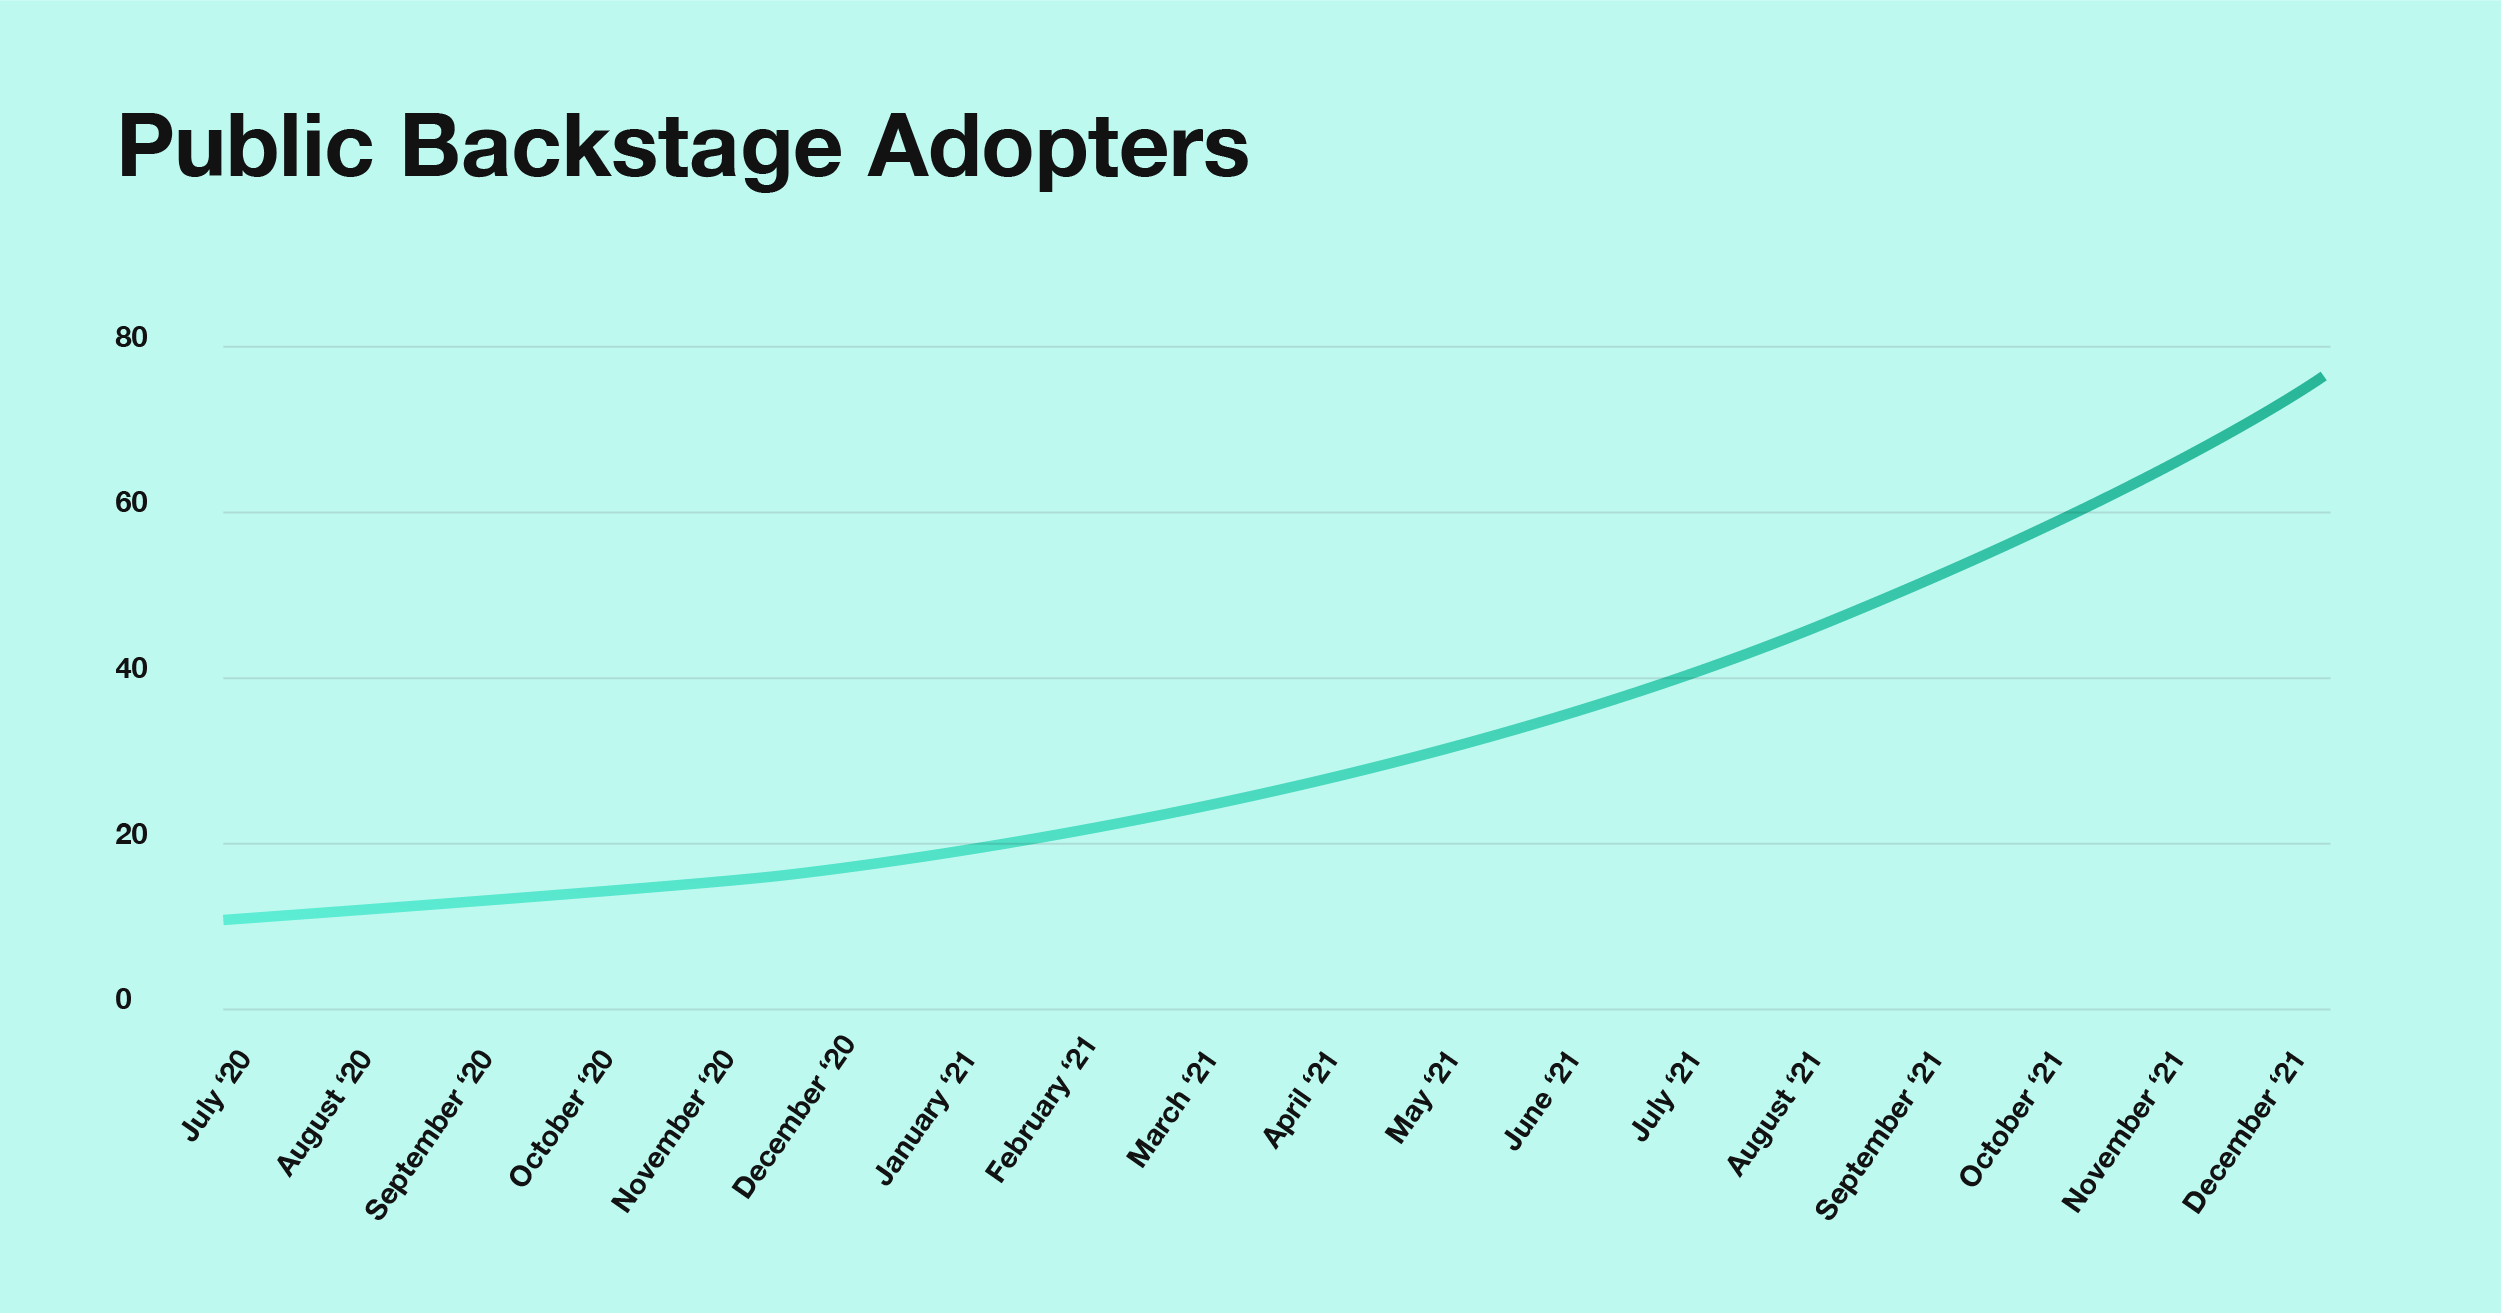 Accelerated growth of Public Backstage Adopters, from July 2020–December 2021.